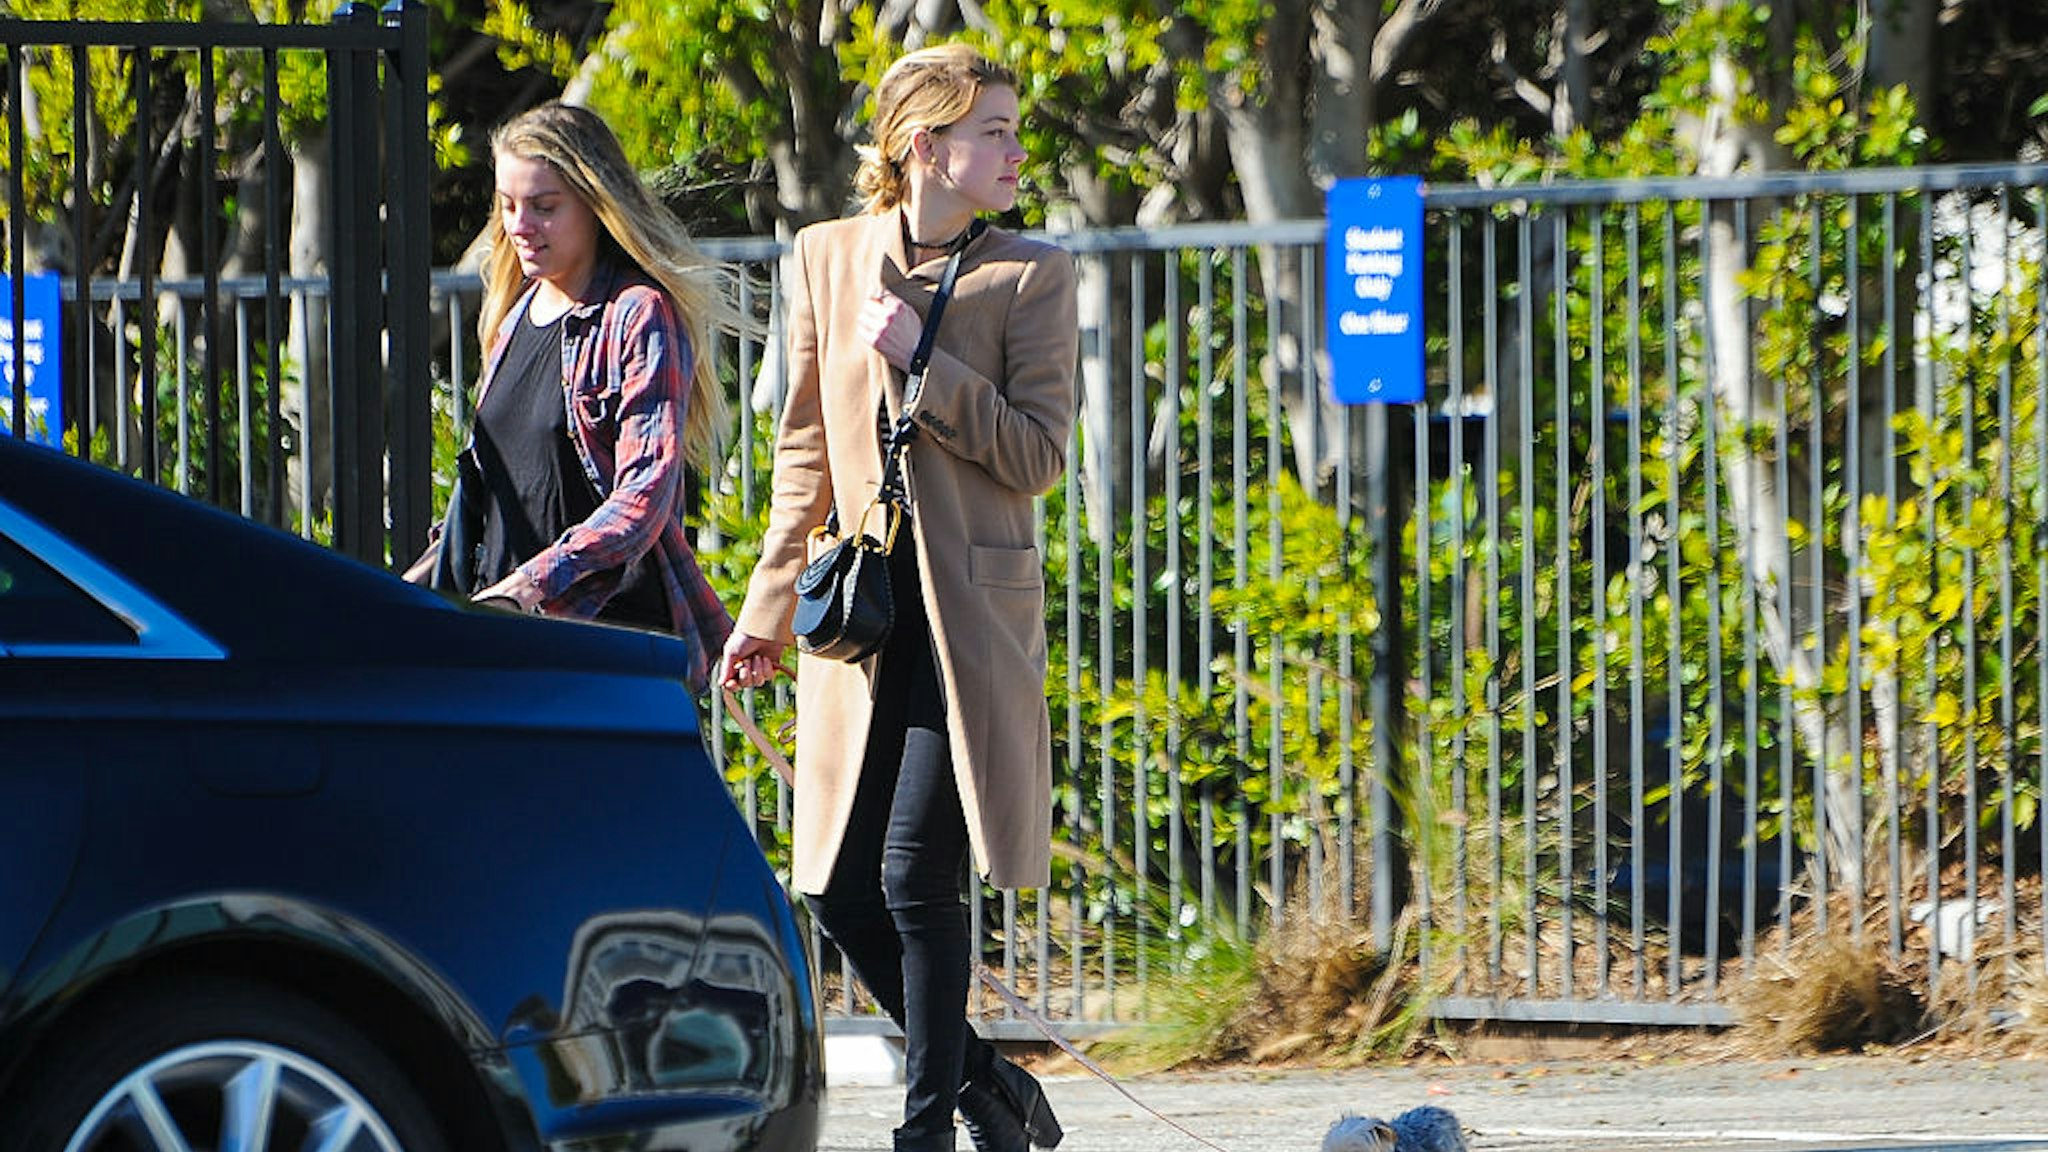 Amber Heard and her sister Whitney Heard(L) are seen on January 26, 2017 in Los Angeles, California.